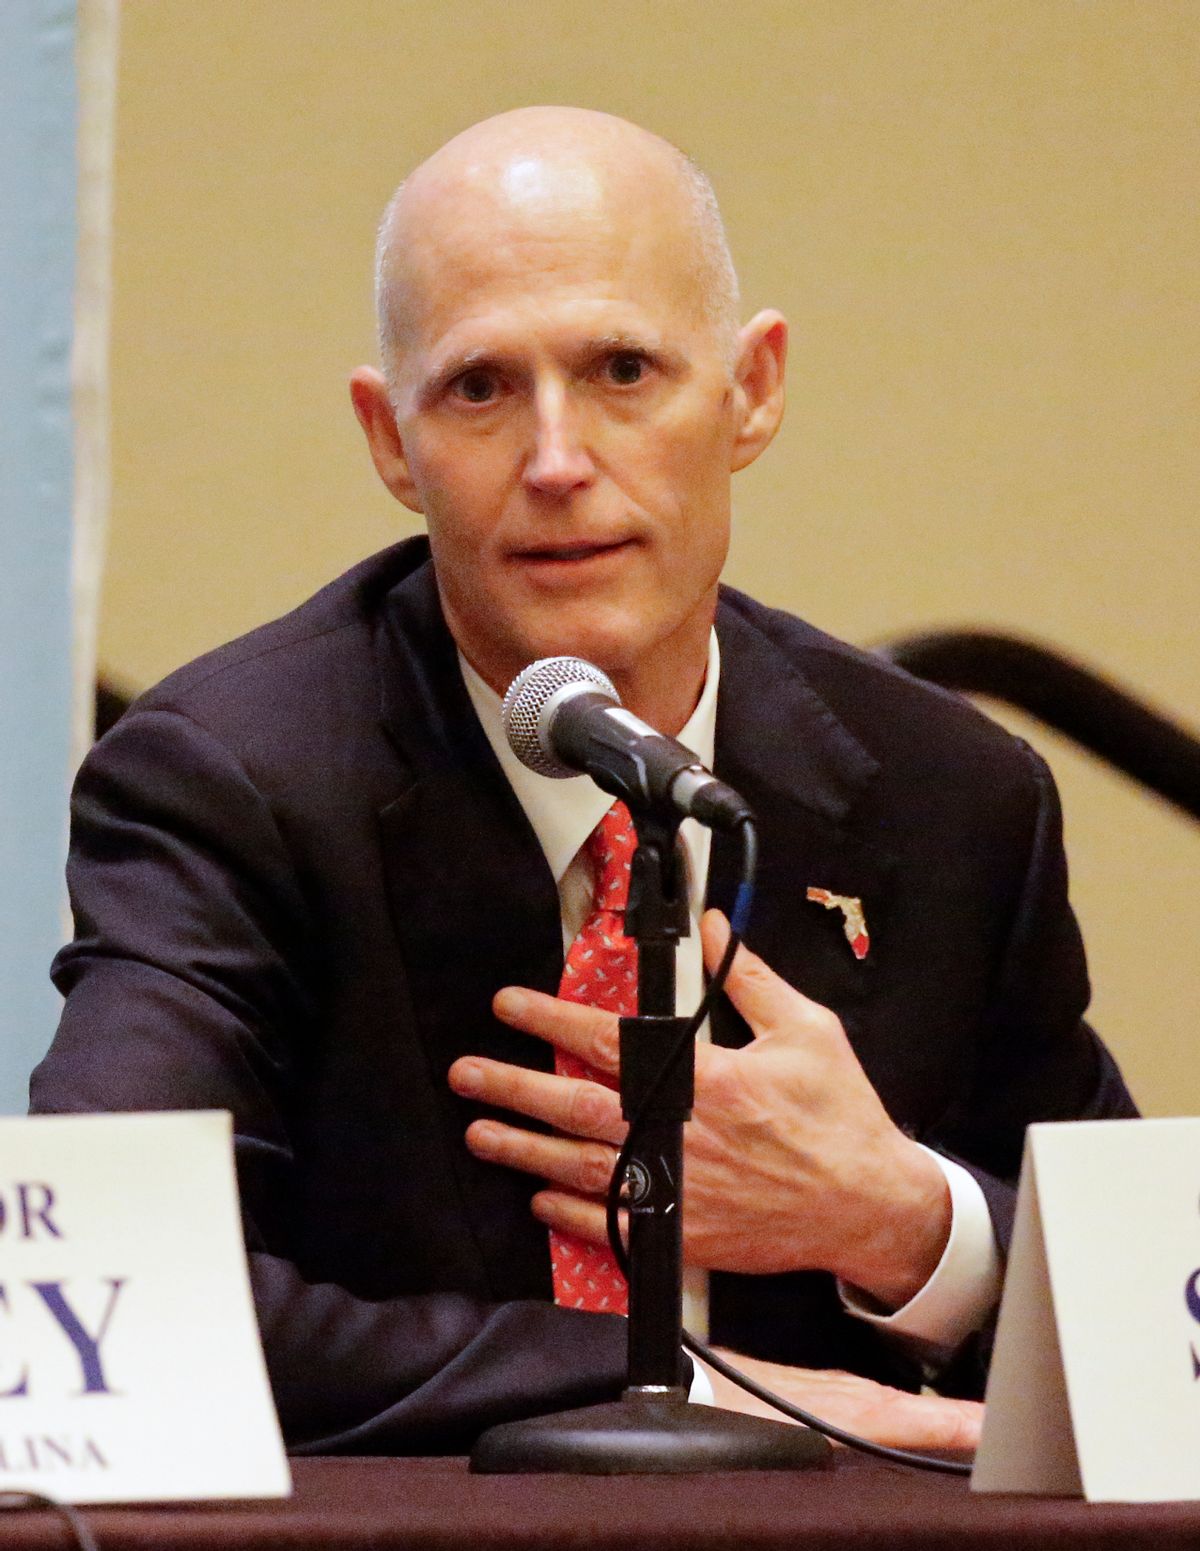 Florida Gov. Rick Scott answers a question during a news conference at the Republican Governors Association annual conference, Tuesday, Nov. 15, 2016, in Orlando, Fla. (AP Photo/John Raoux) (AP)